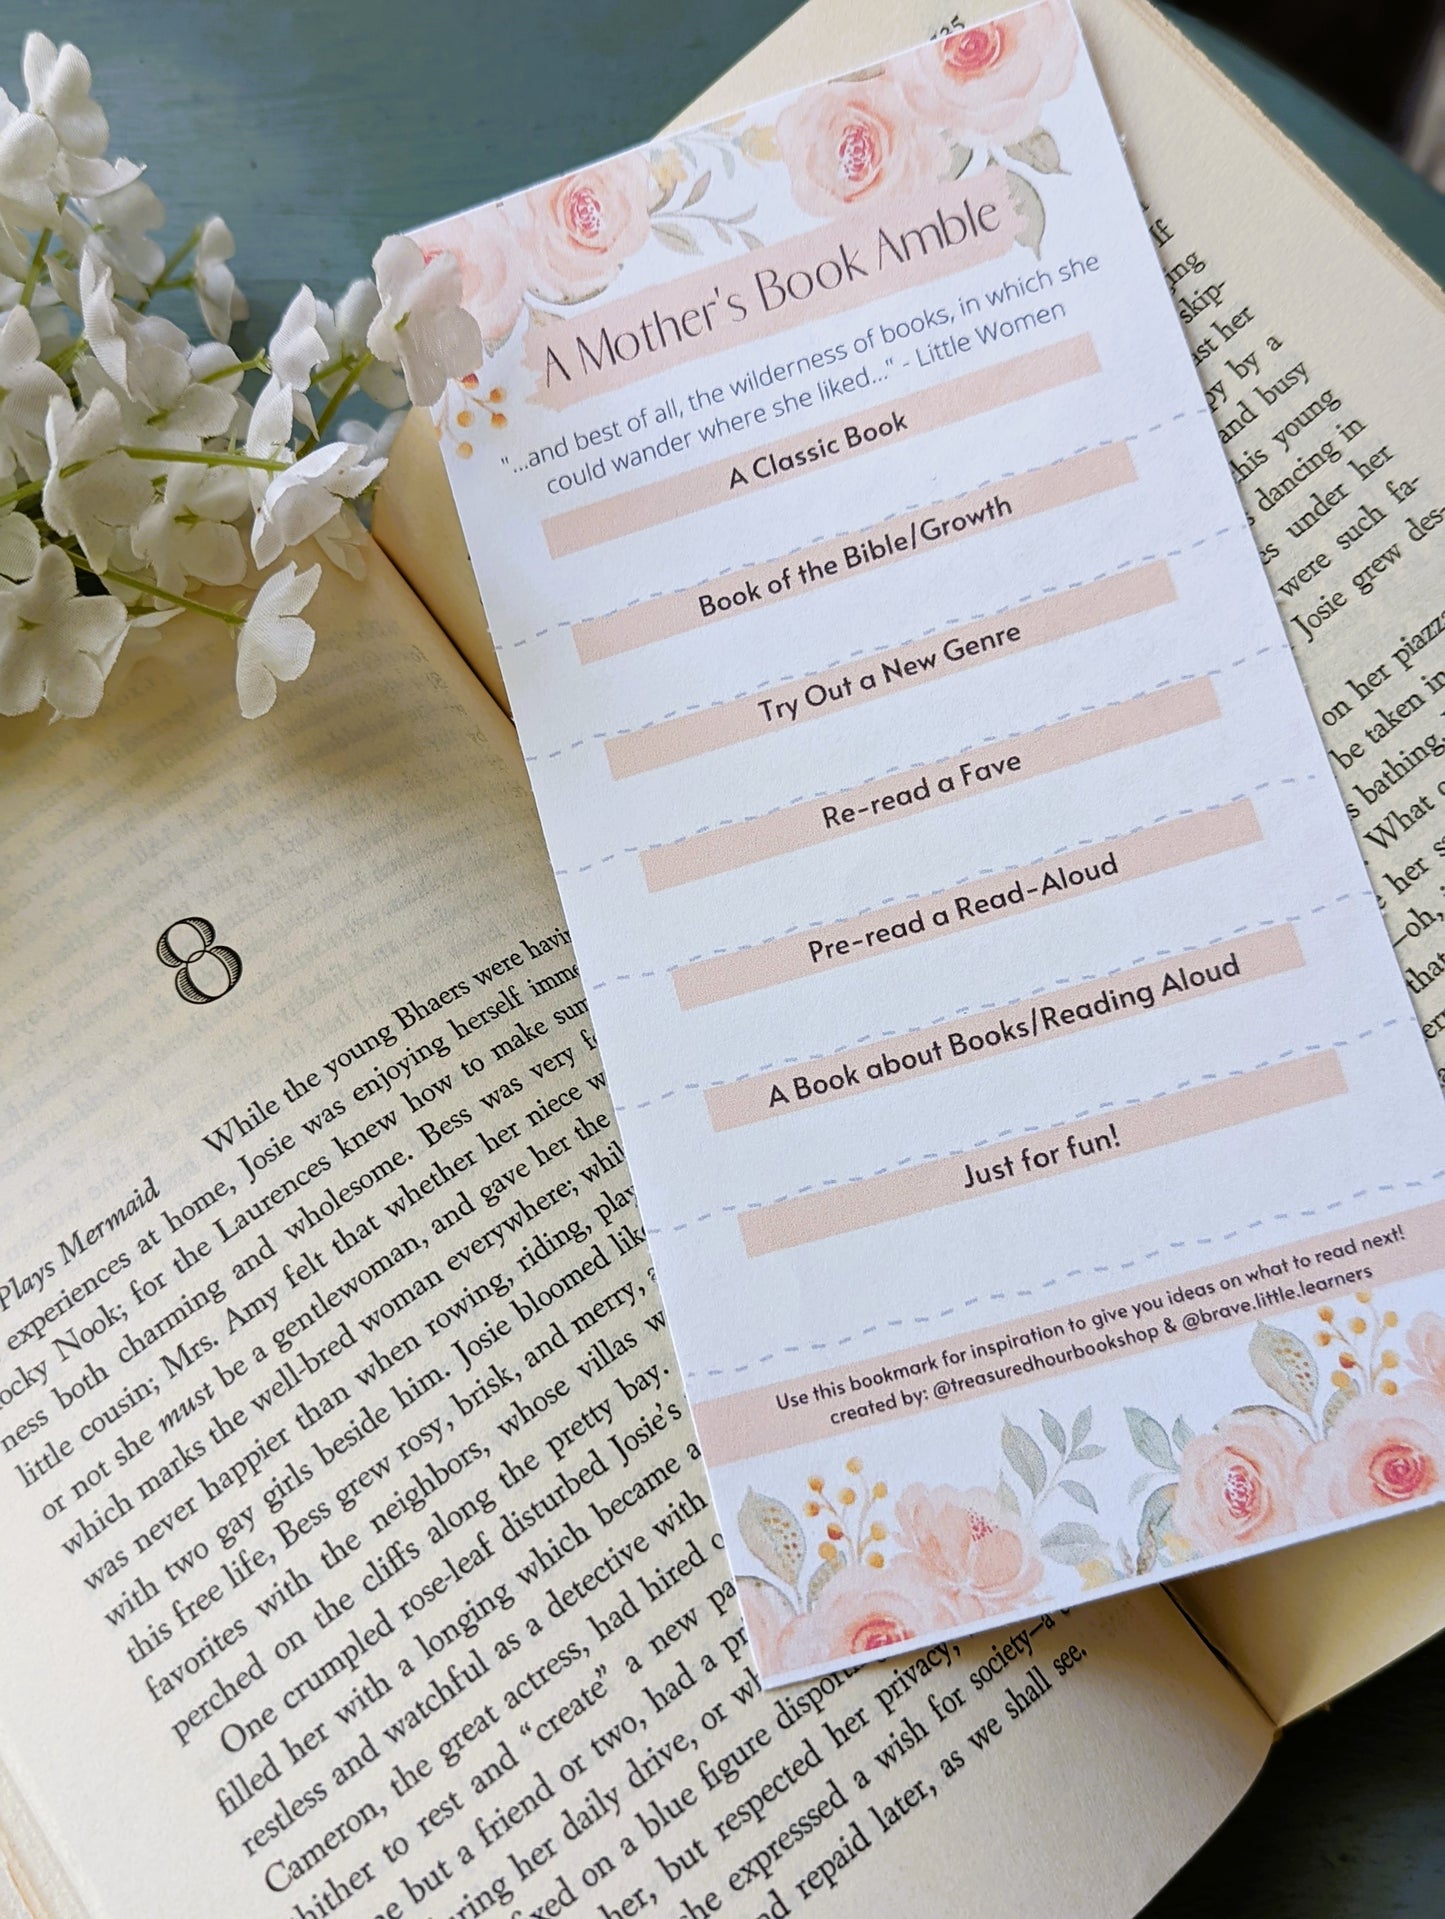 "A Mother's Book Amble" Bookmark